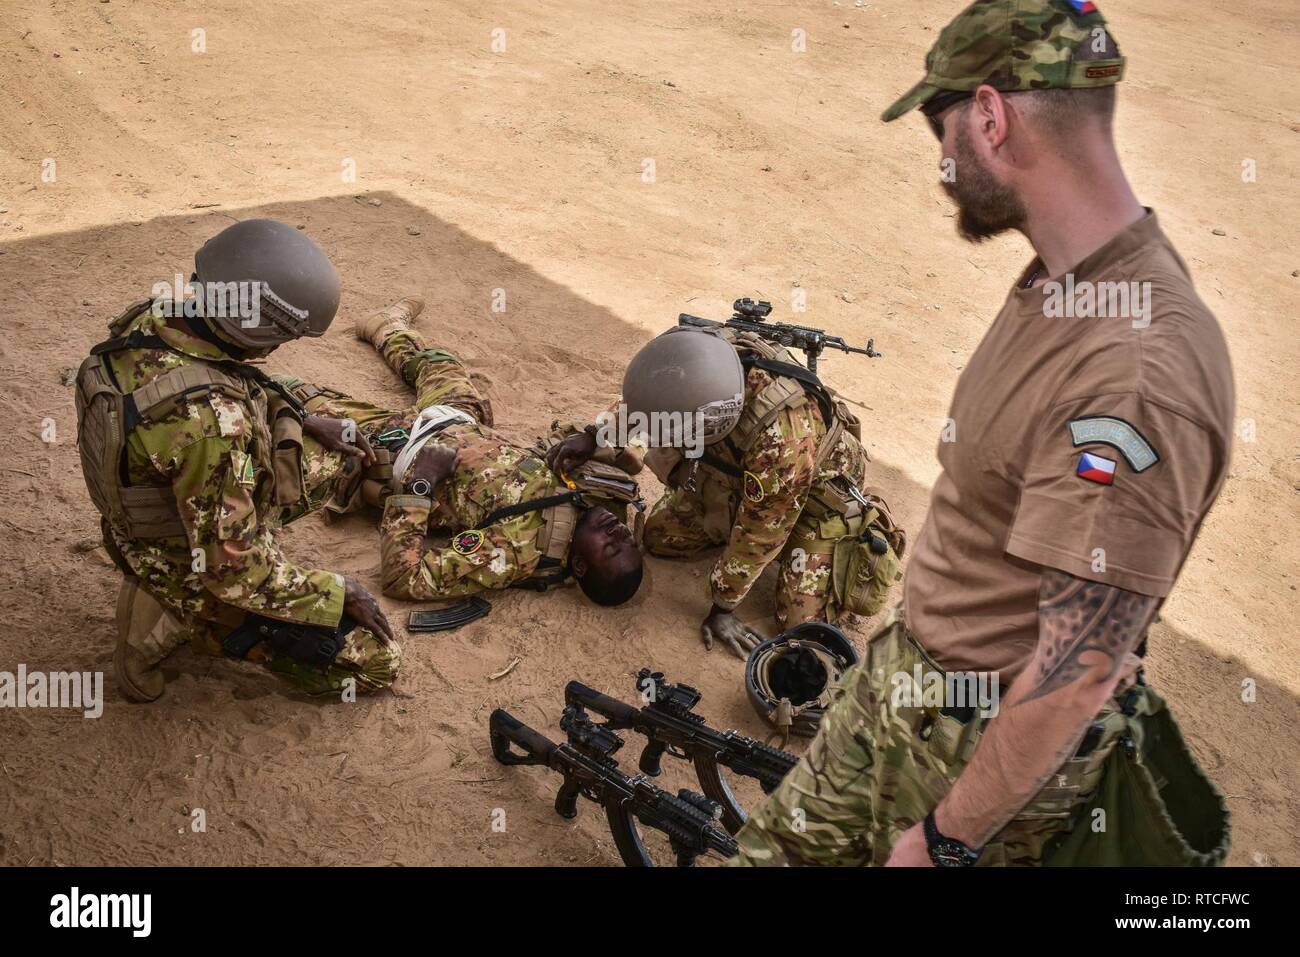 A Czech Special Forces Soldier observes Malian Soldiers as they tend to a simulated injured soldier during Flintlock 2019 medical training in Loumbila, Burkina Faso Feb. 16, 2019. The medical training provides Malian Soldiers the opportunity to get hands on medical experience from multinational special forces soldiers. Stock Photo